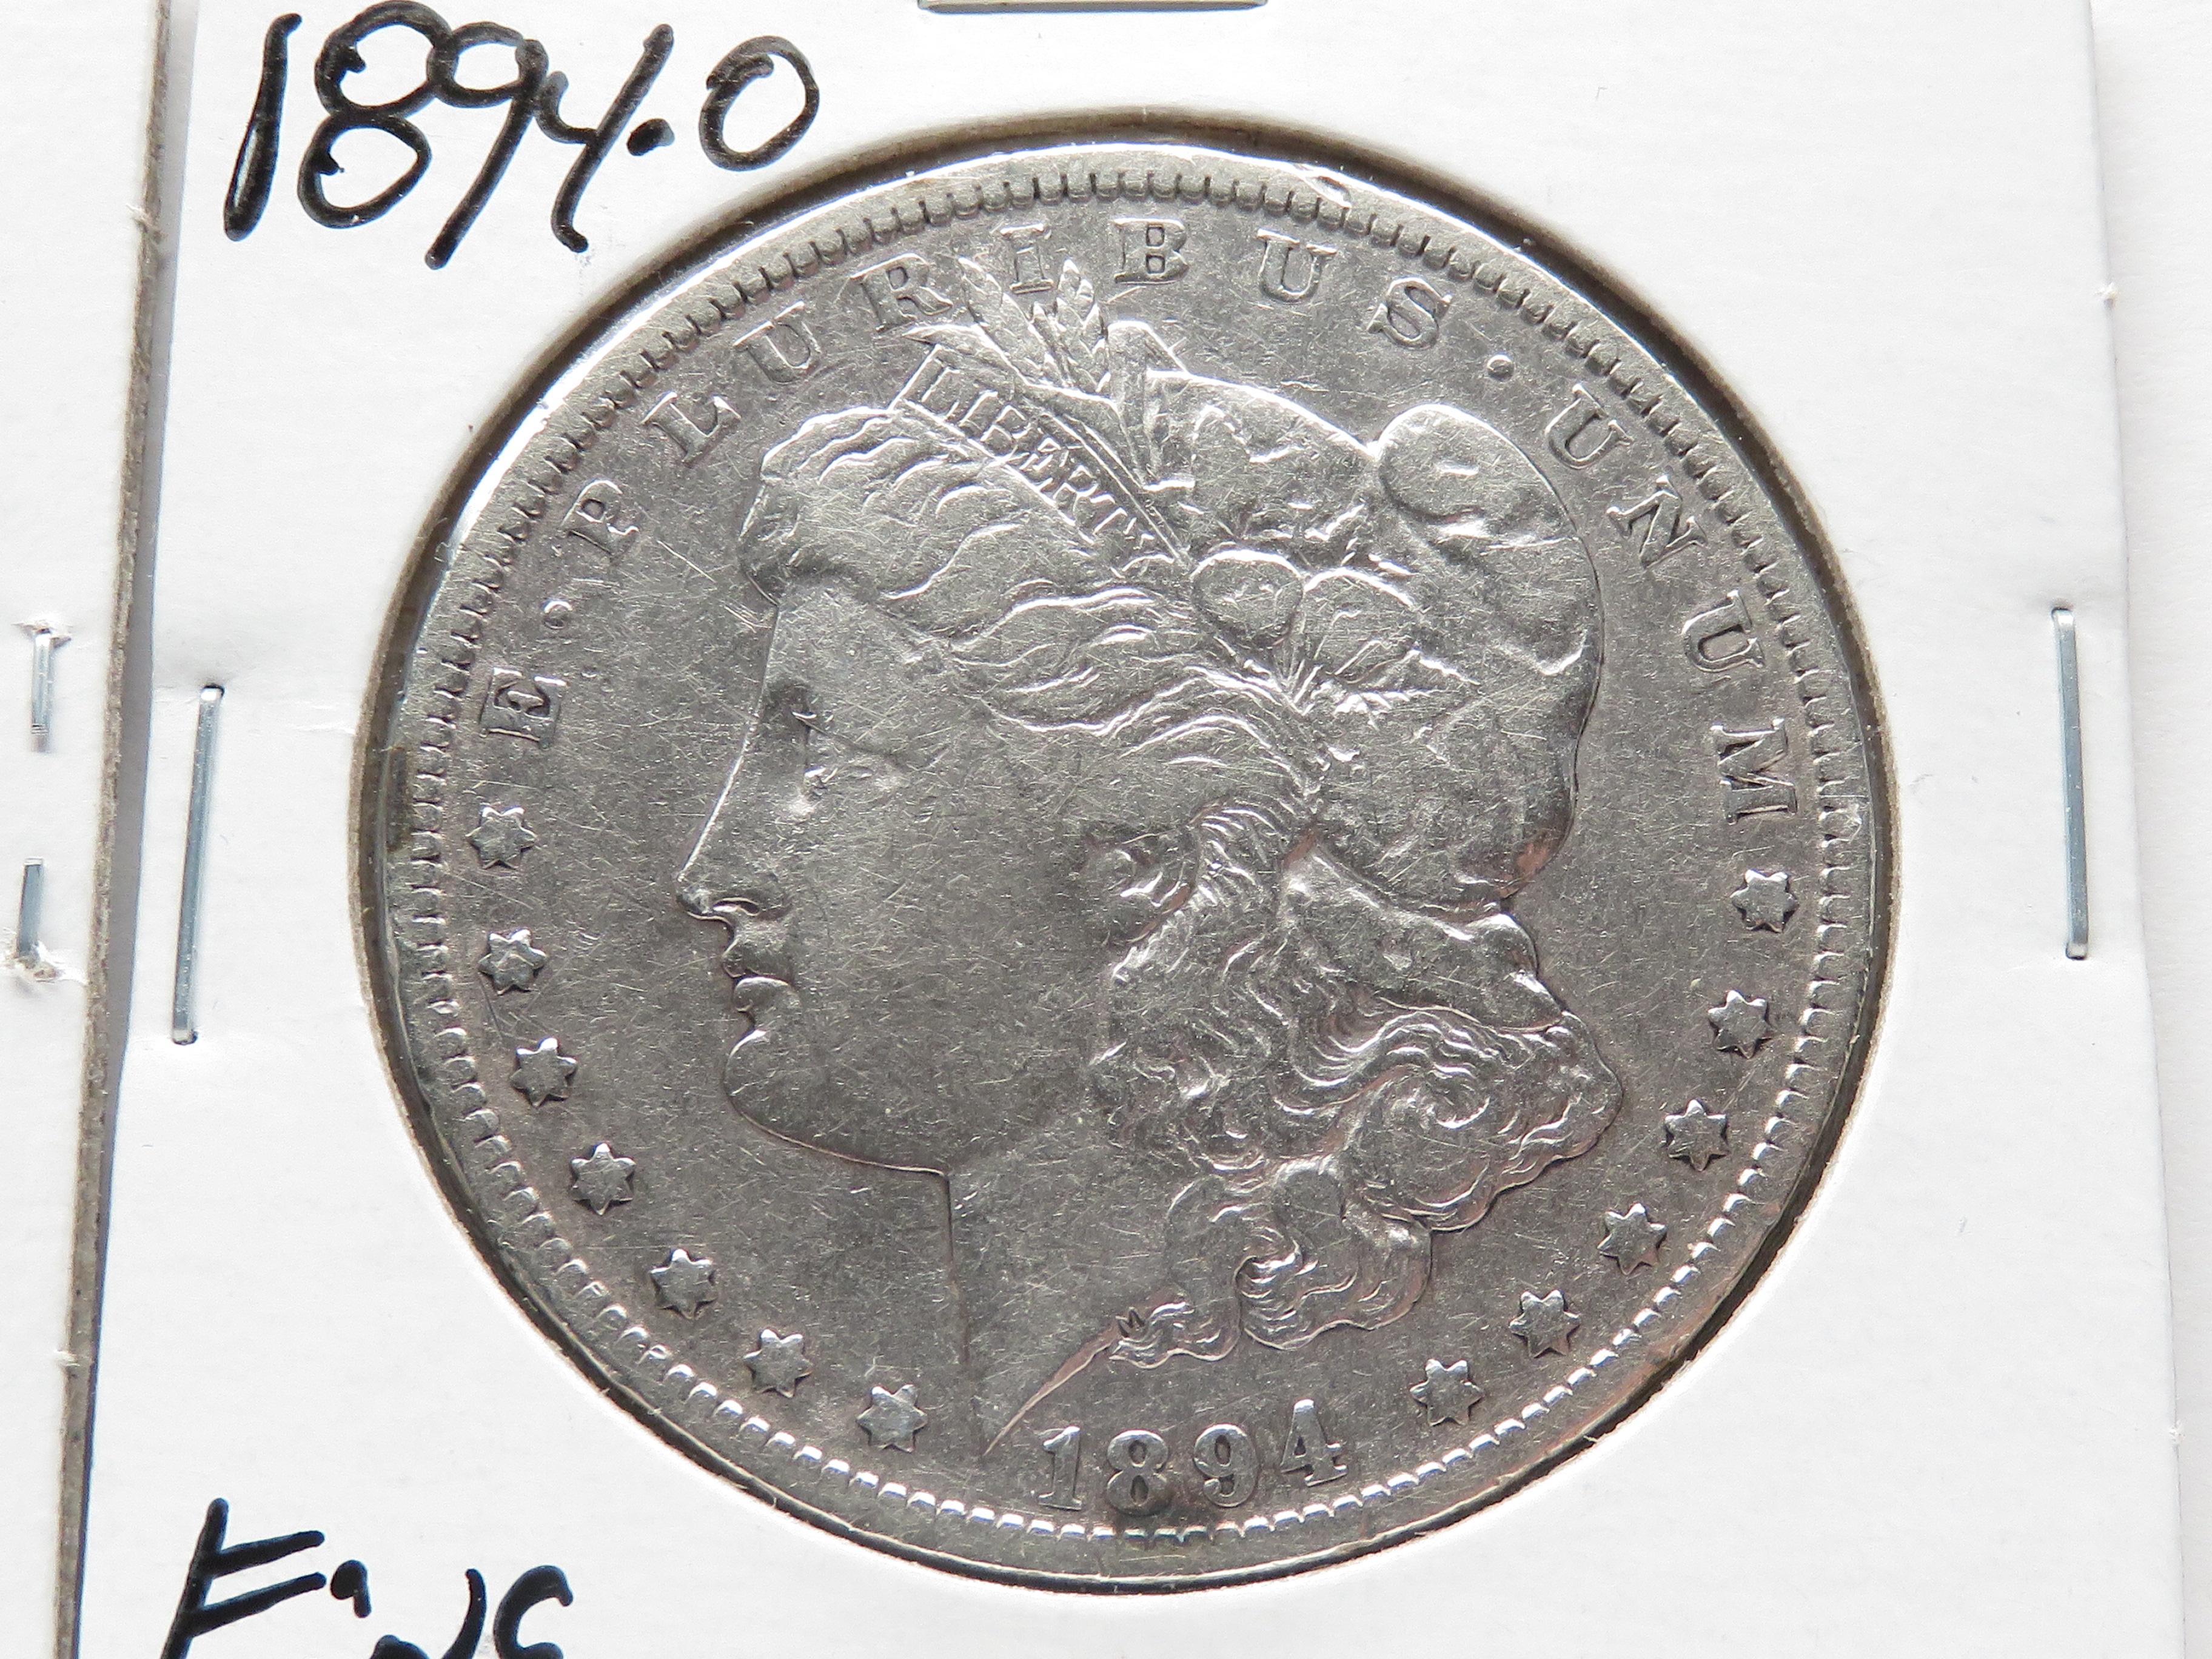 3 Morgan $: 1891 VF cleaned, 1892S VG problems better date, 1894-O F